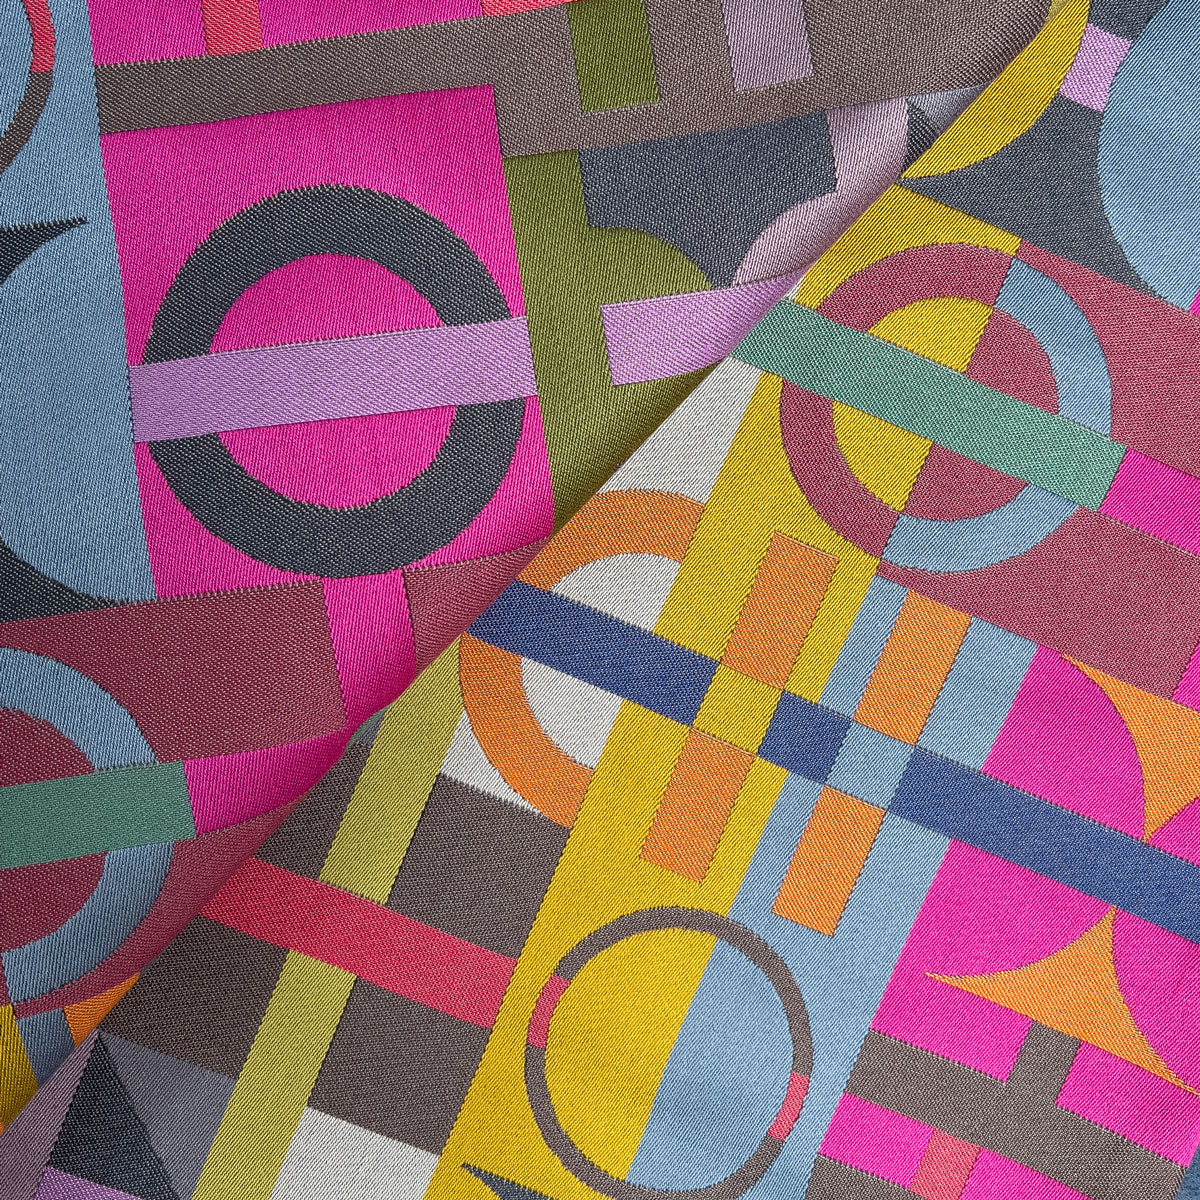 Interior accessories, interior decoration, British weaving, Margo Selby fabric, patterned fabric, colourful fabric, designer fabric, pink fabric, blue fabric